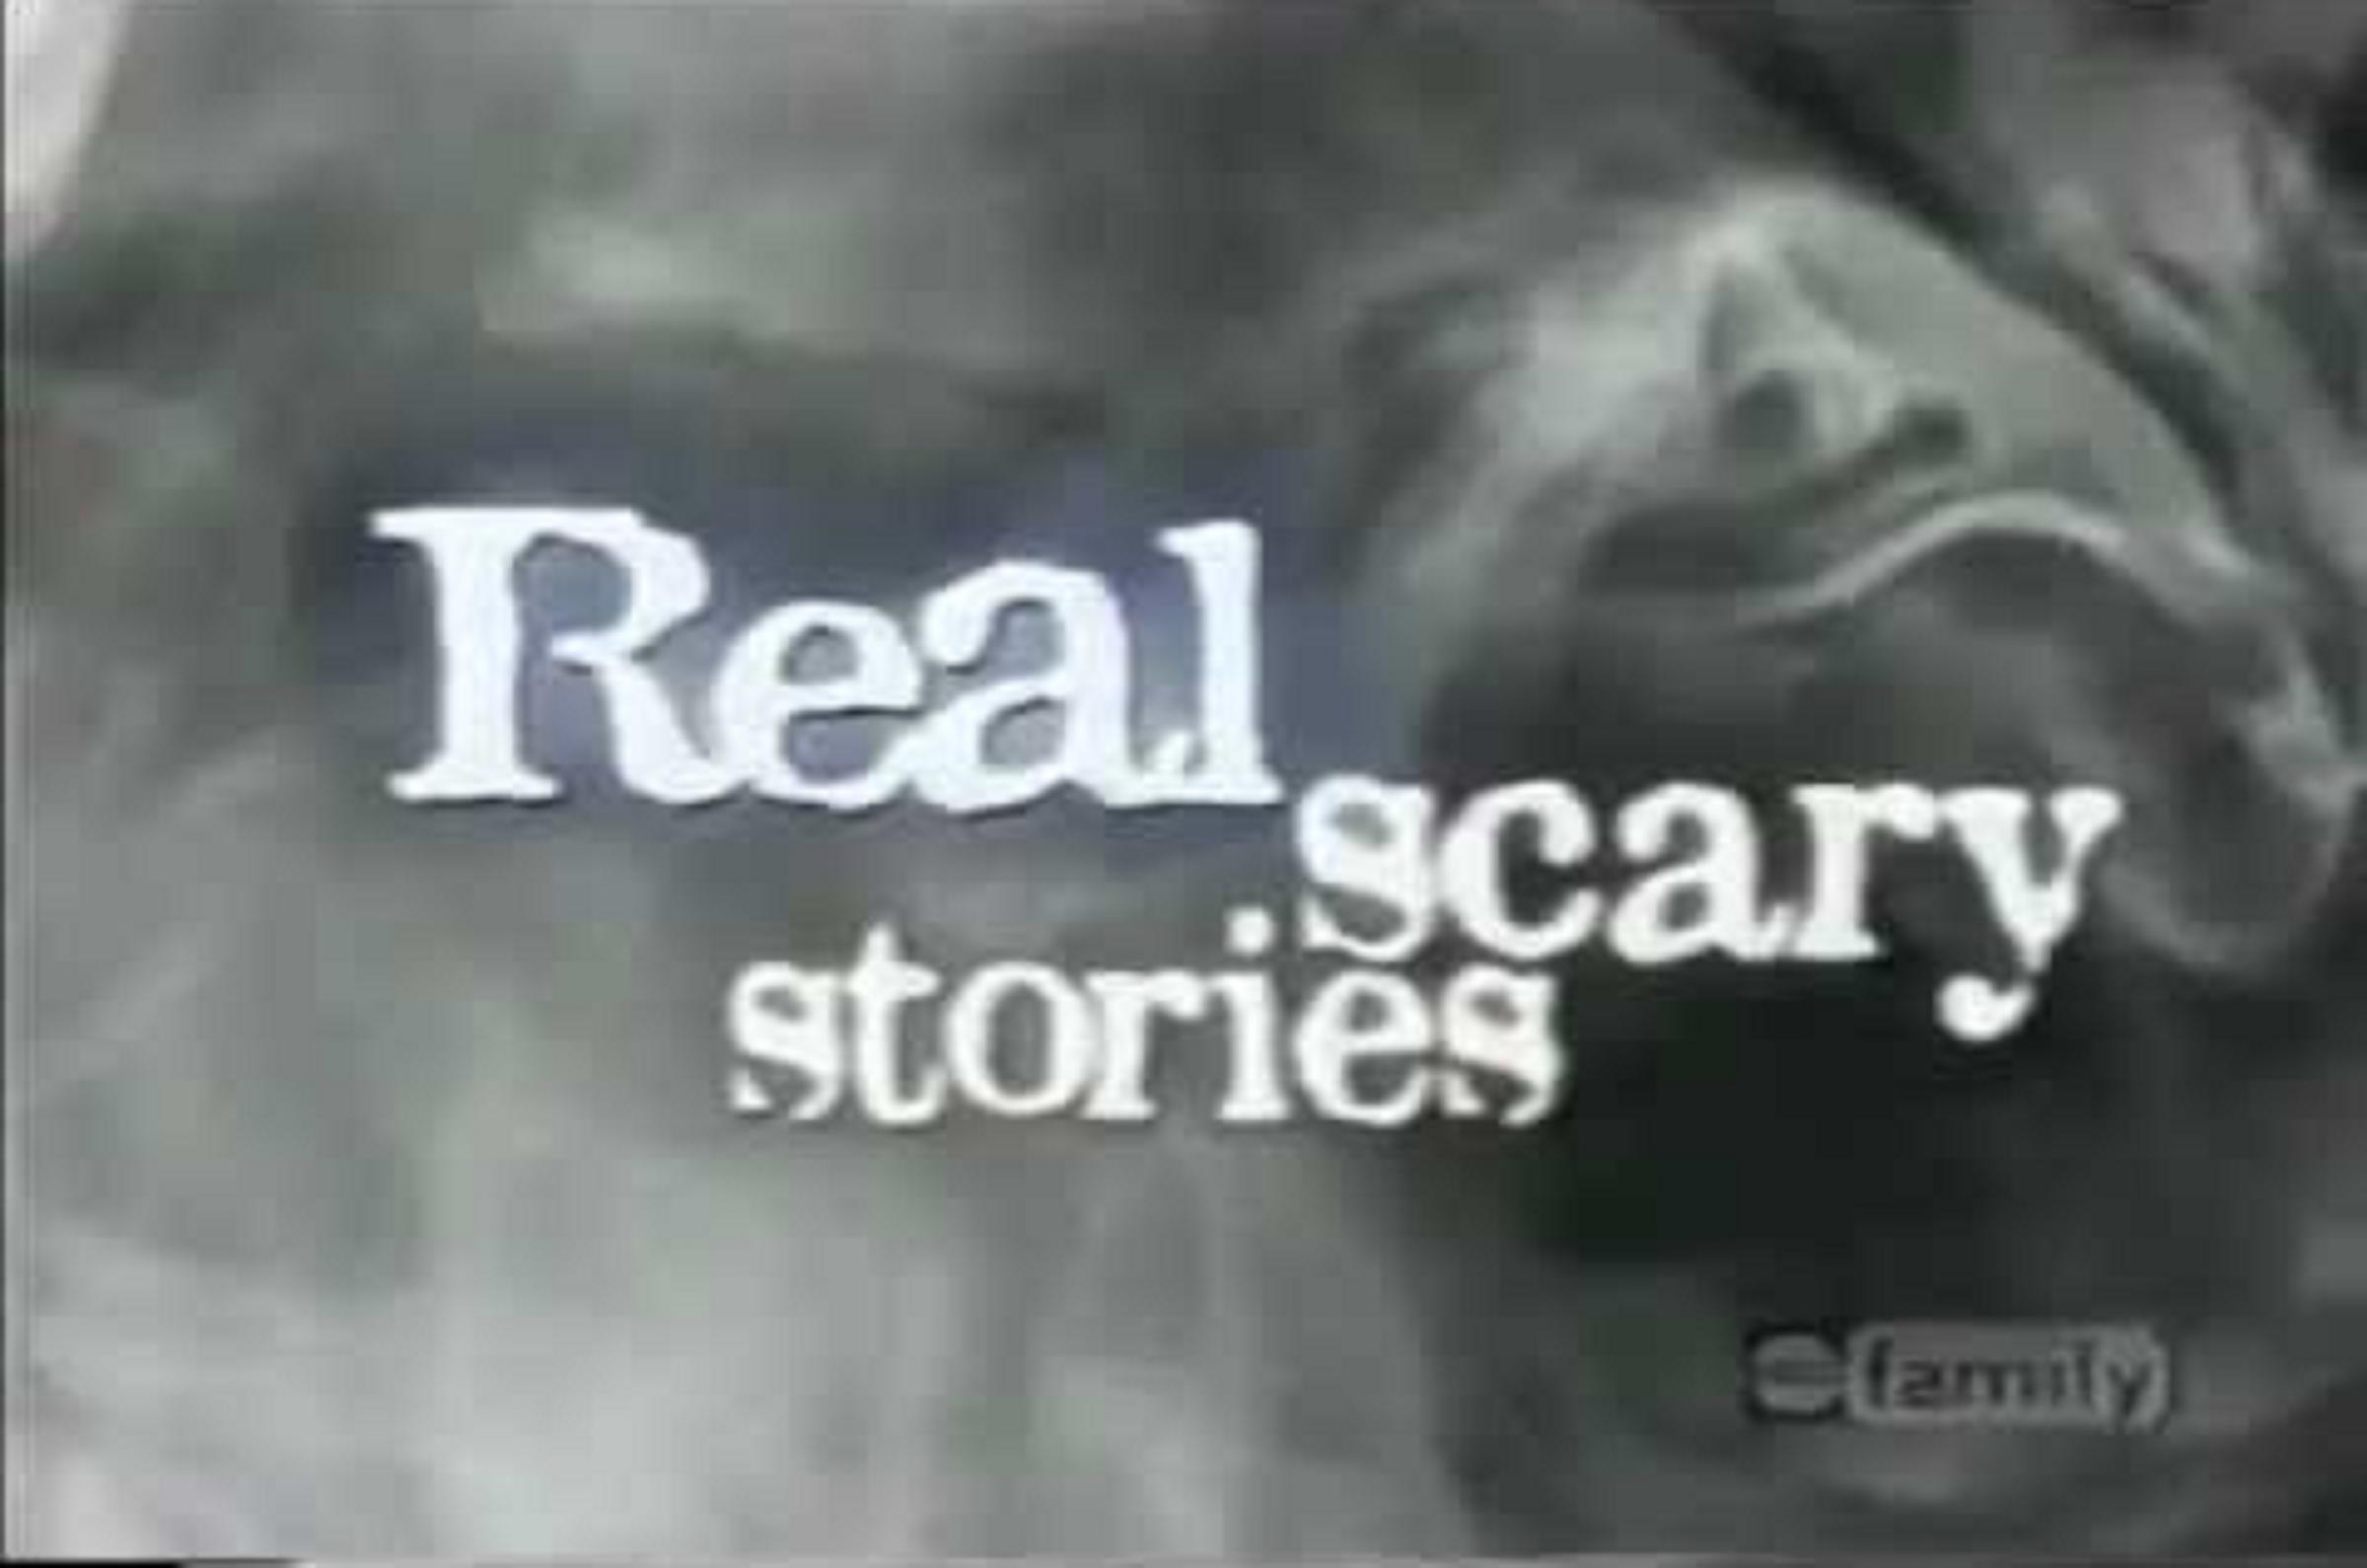 Real Scary Stories